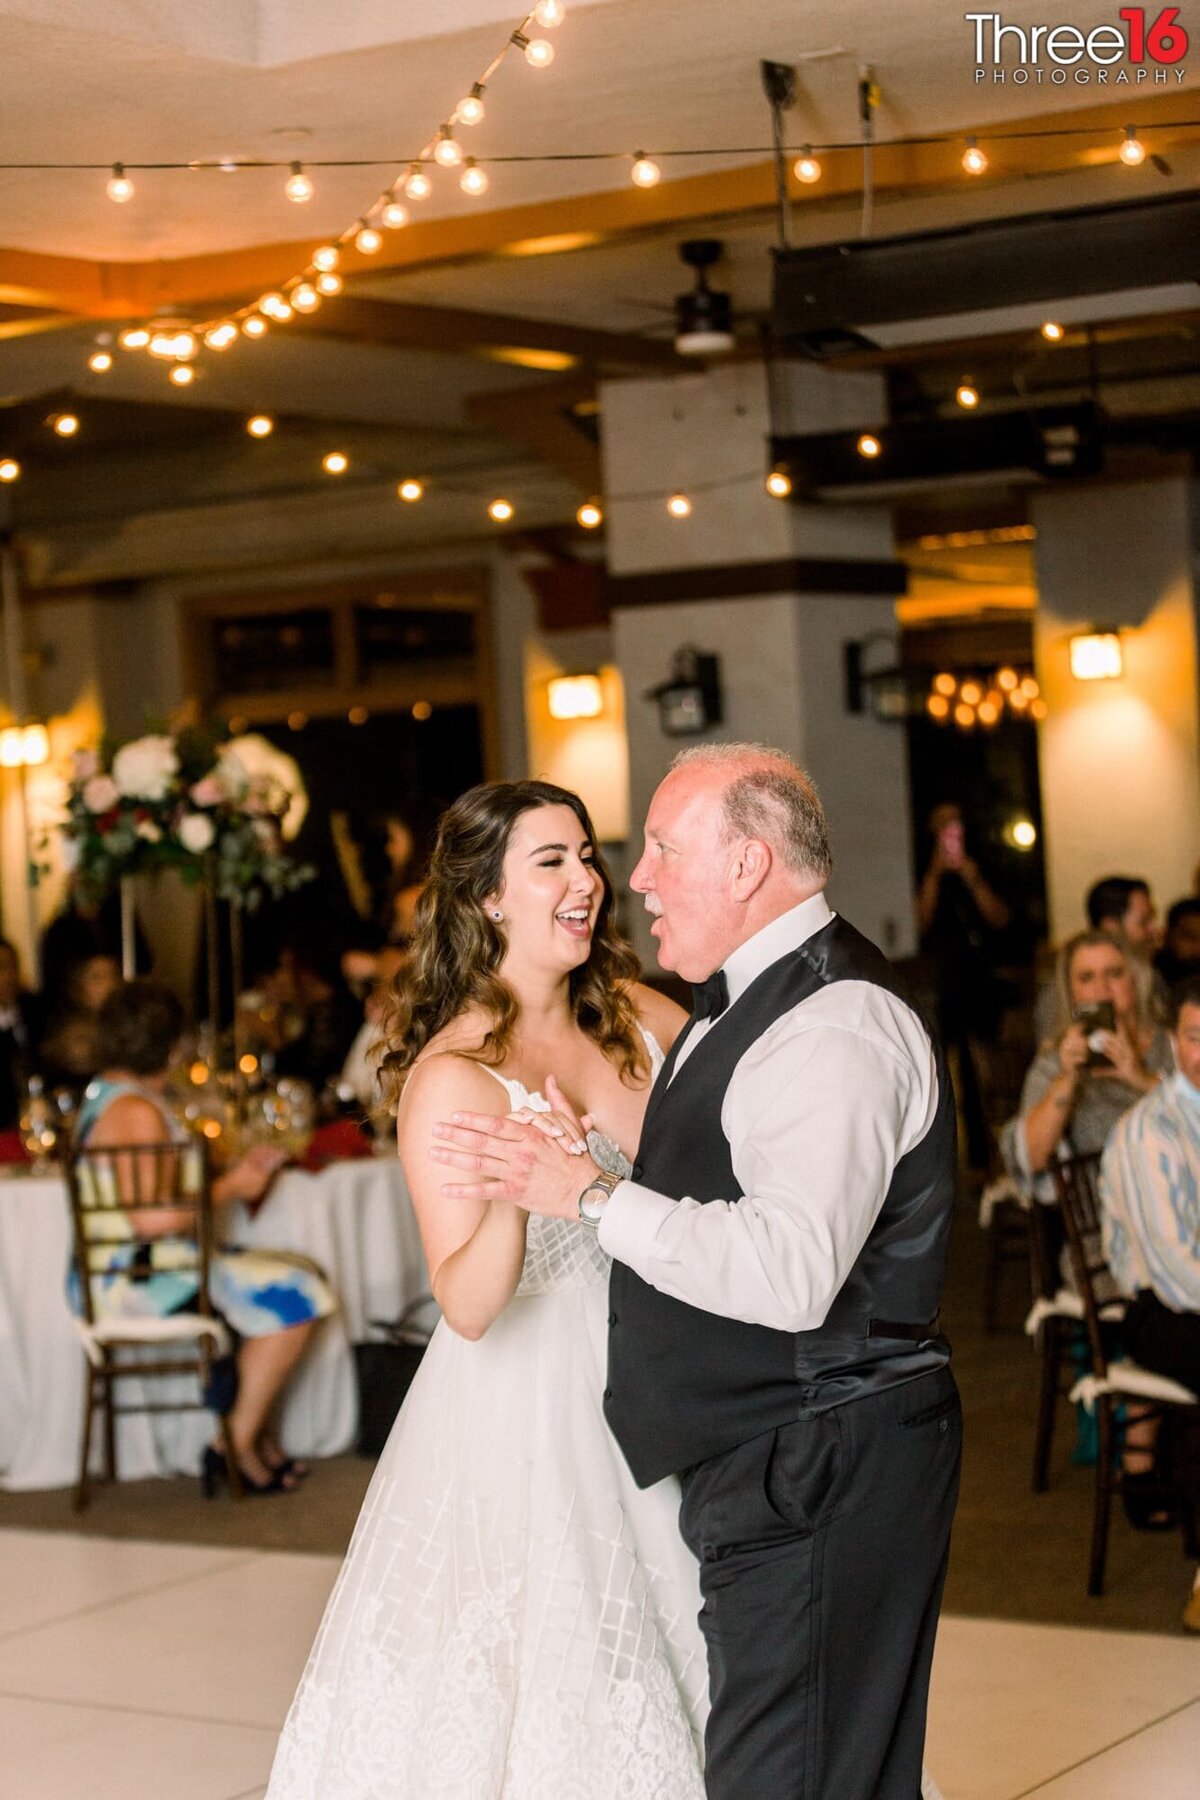 Bride dances with her father on the dance floor during her wedding reception